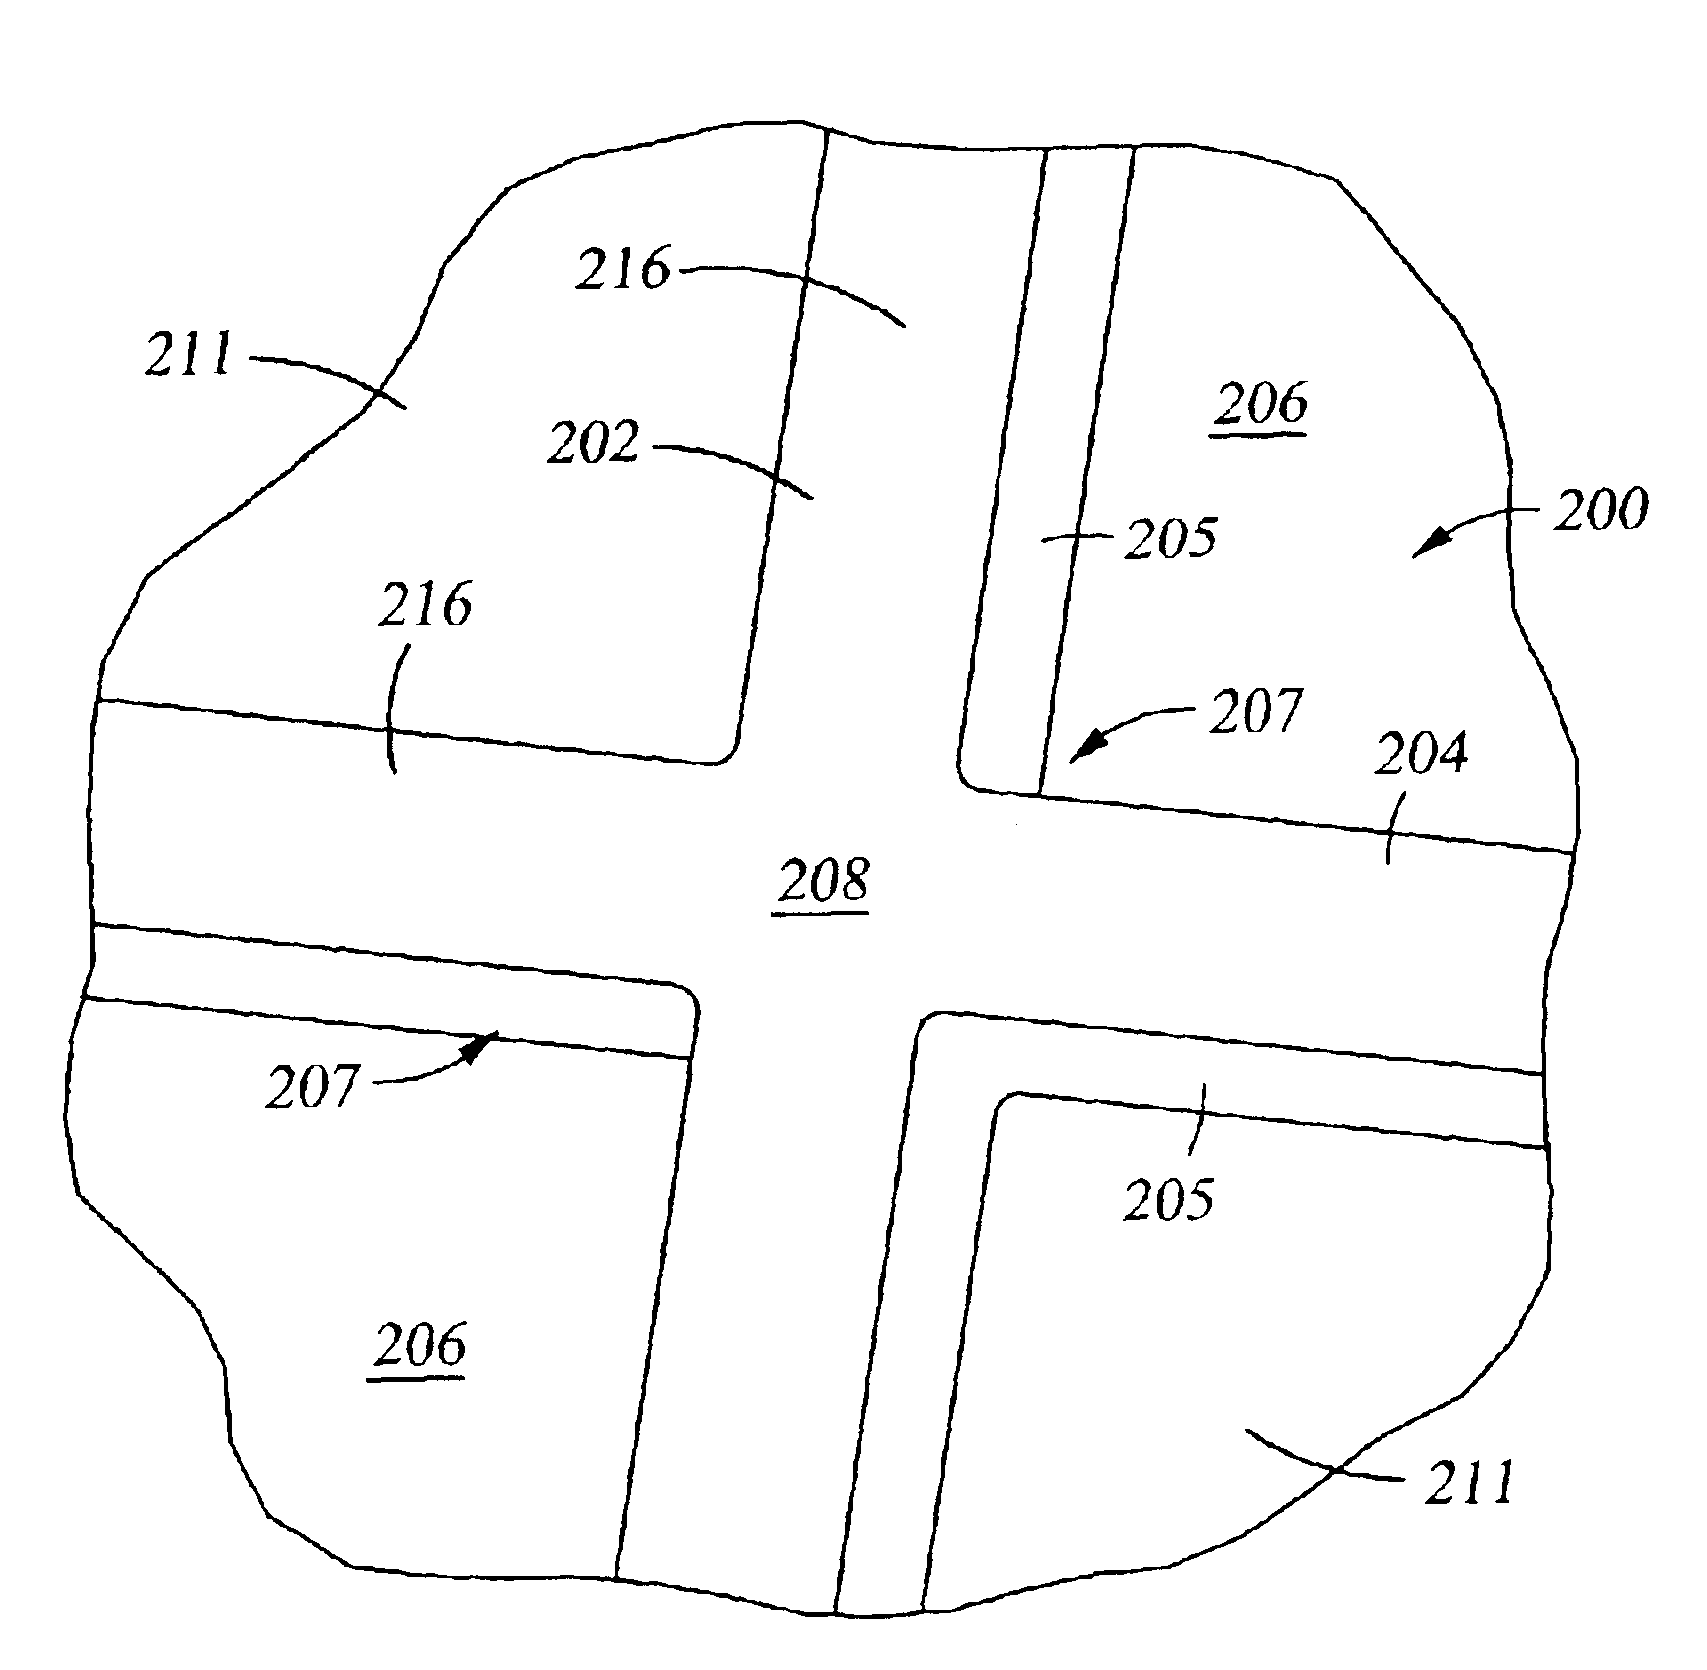 Apparatus for reshaping a patterned organic photoresist surface